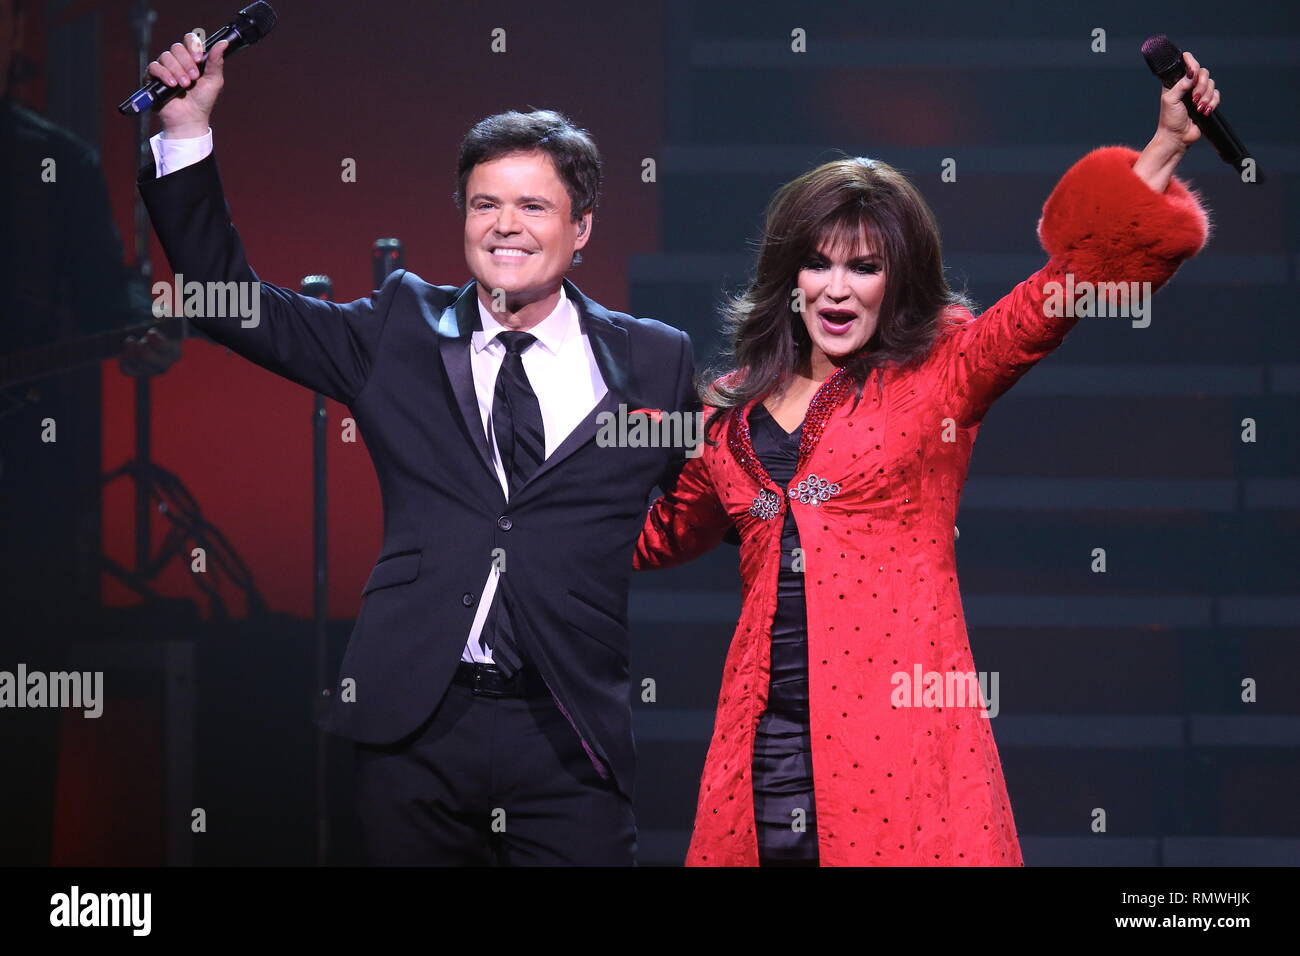 Entertainers Donny and Marie Osmond are shown performing on stage during a 'live' holiday concert show. Stock Photo